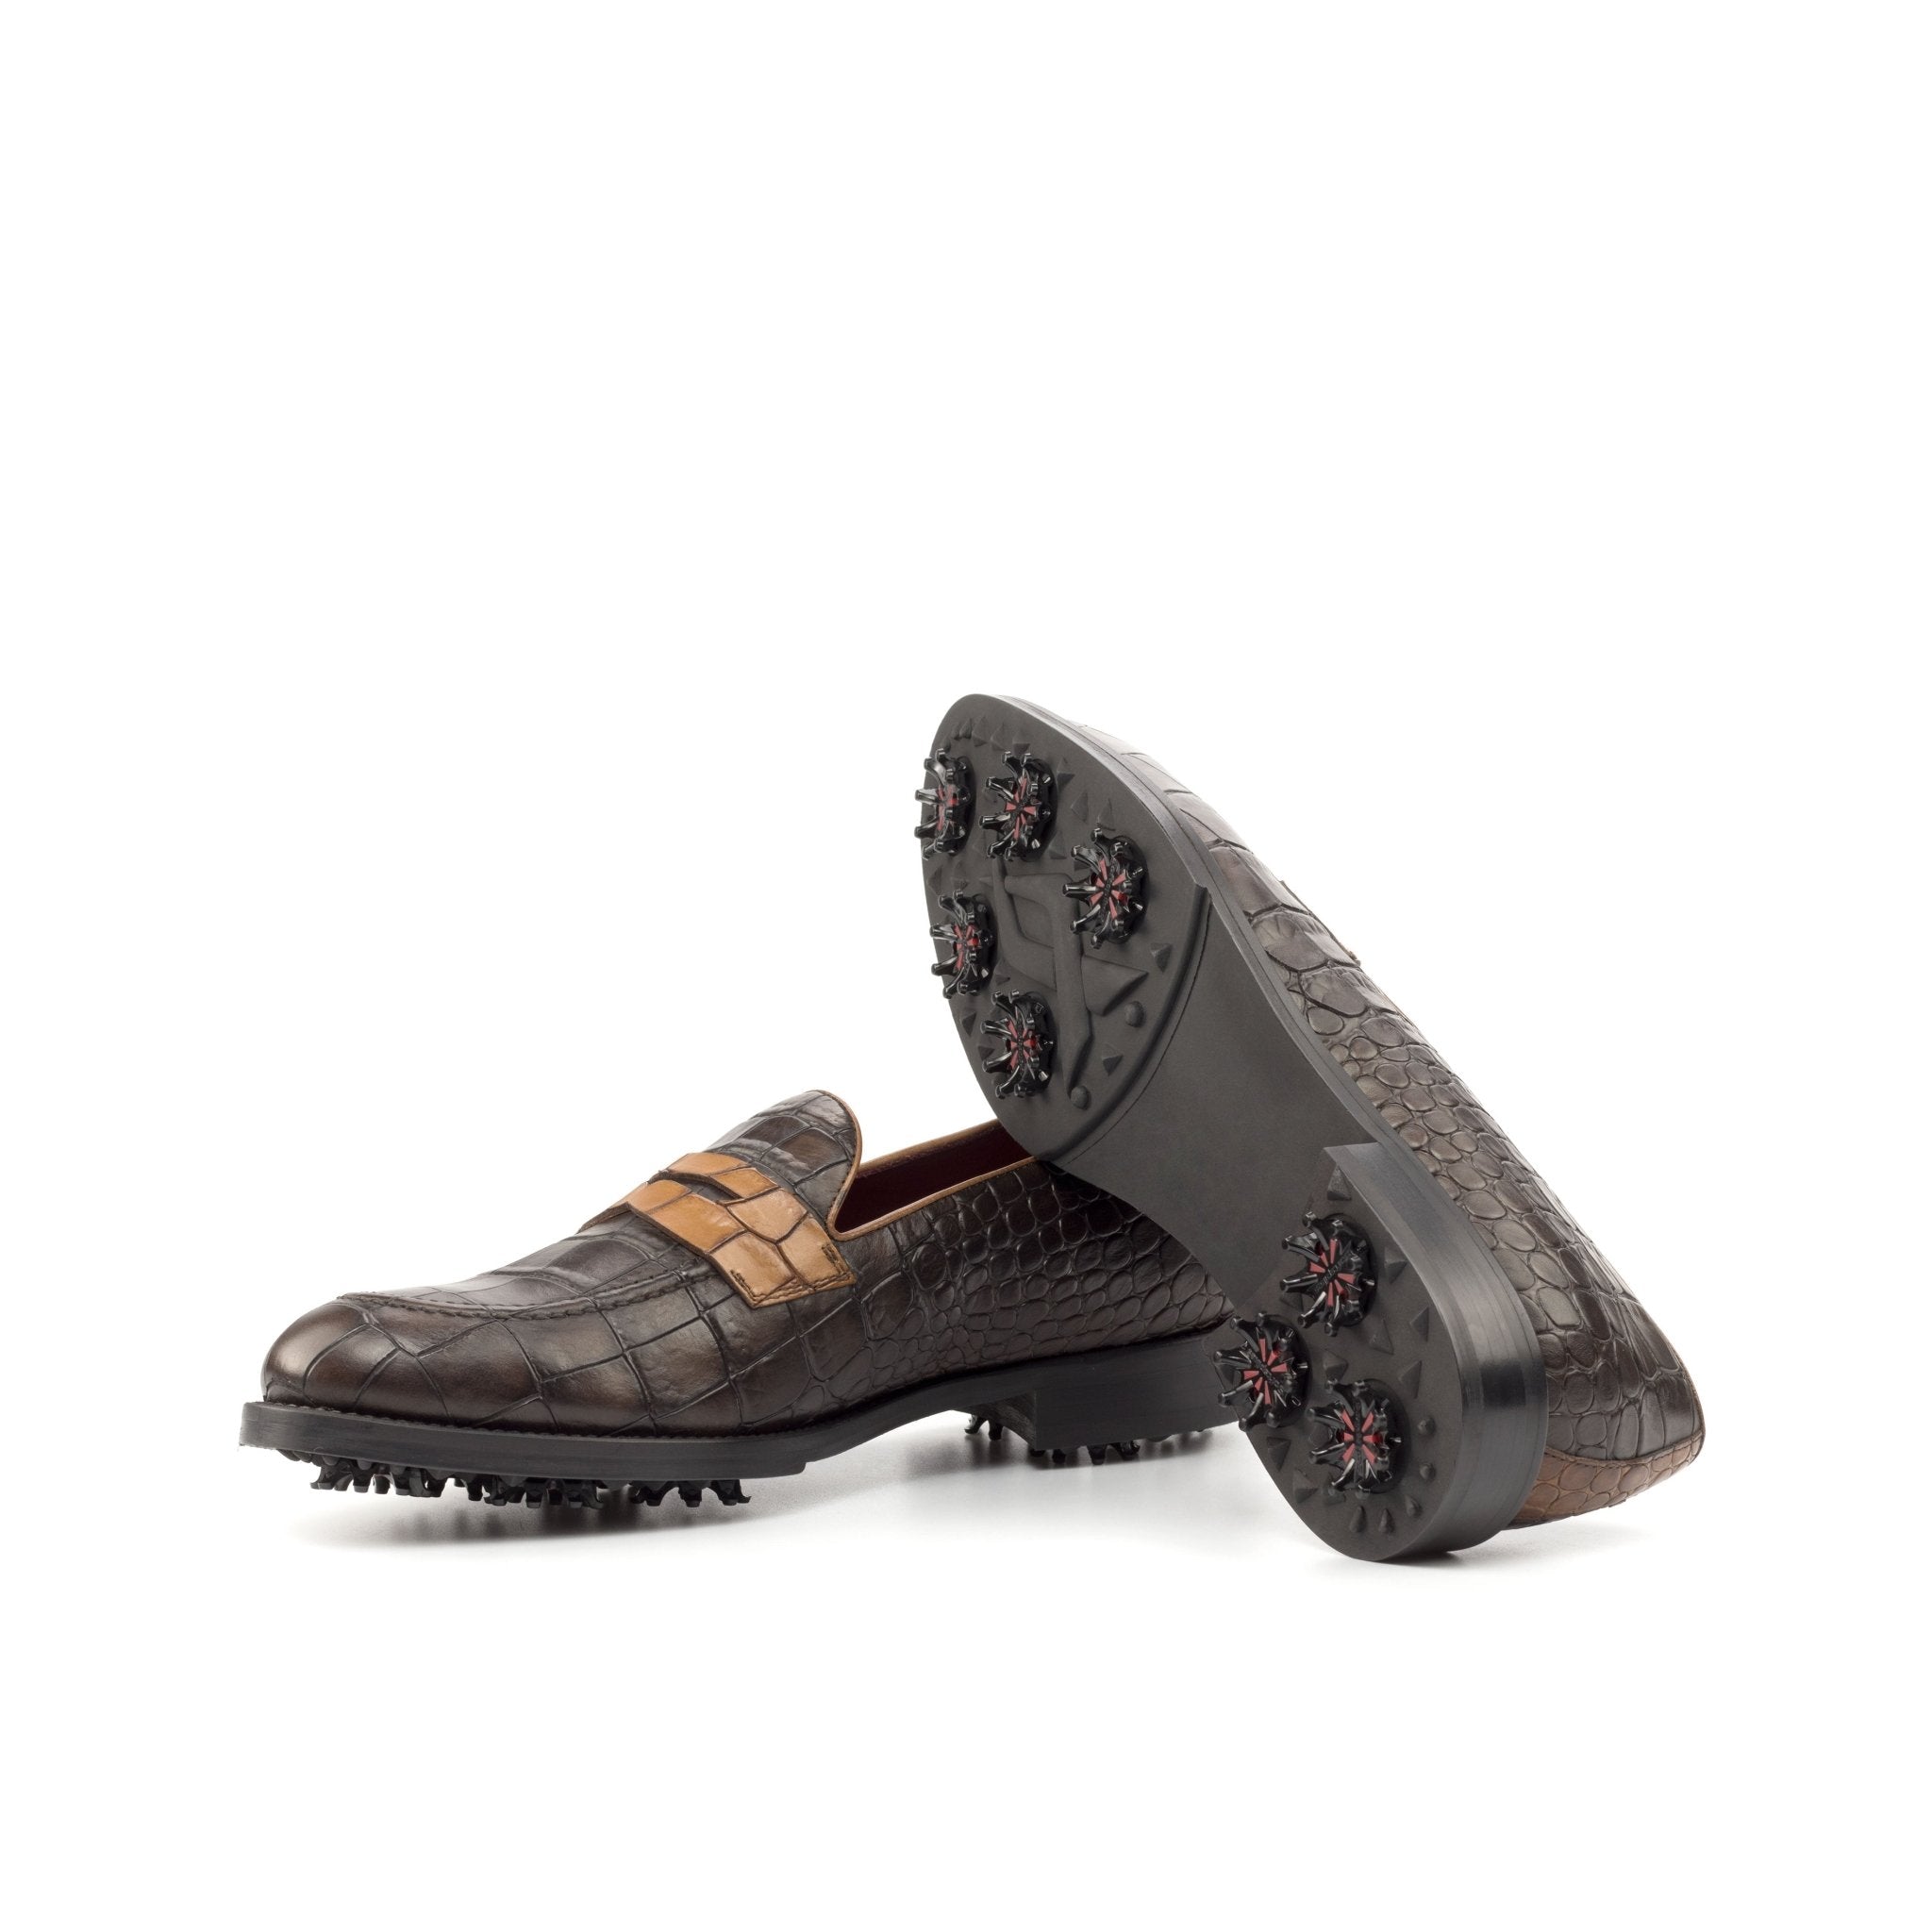 Men's Golf Loafers in Dark and Medium Brown Croc Print Calf - Maison Kingsley Couture Spain